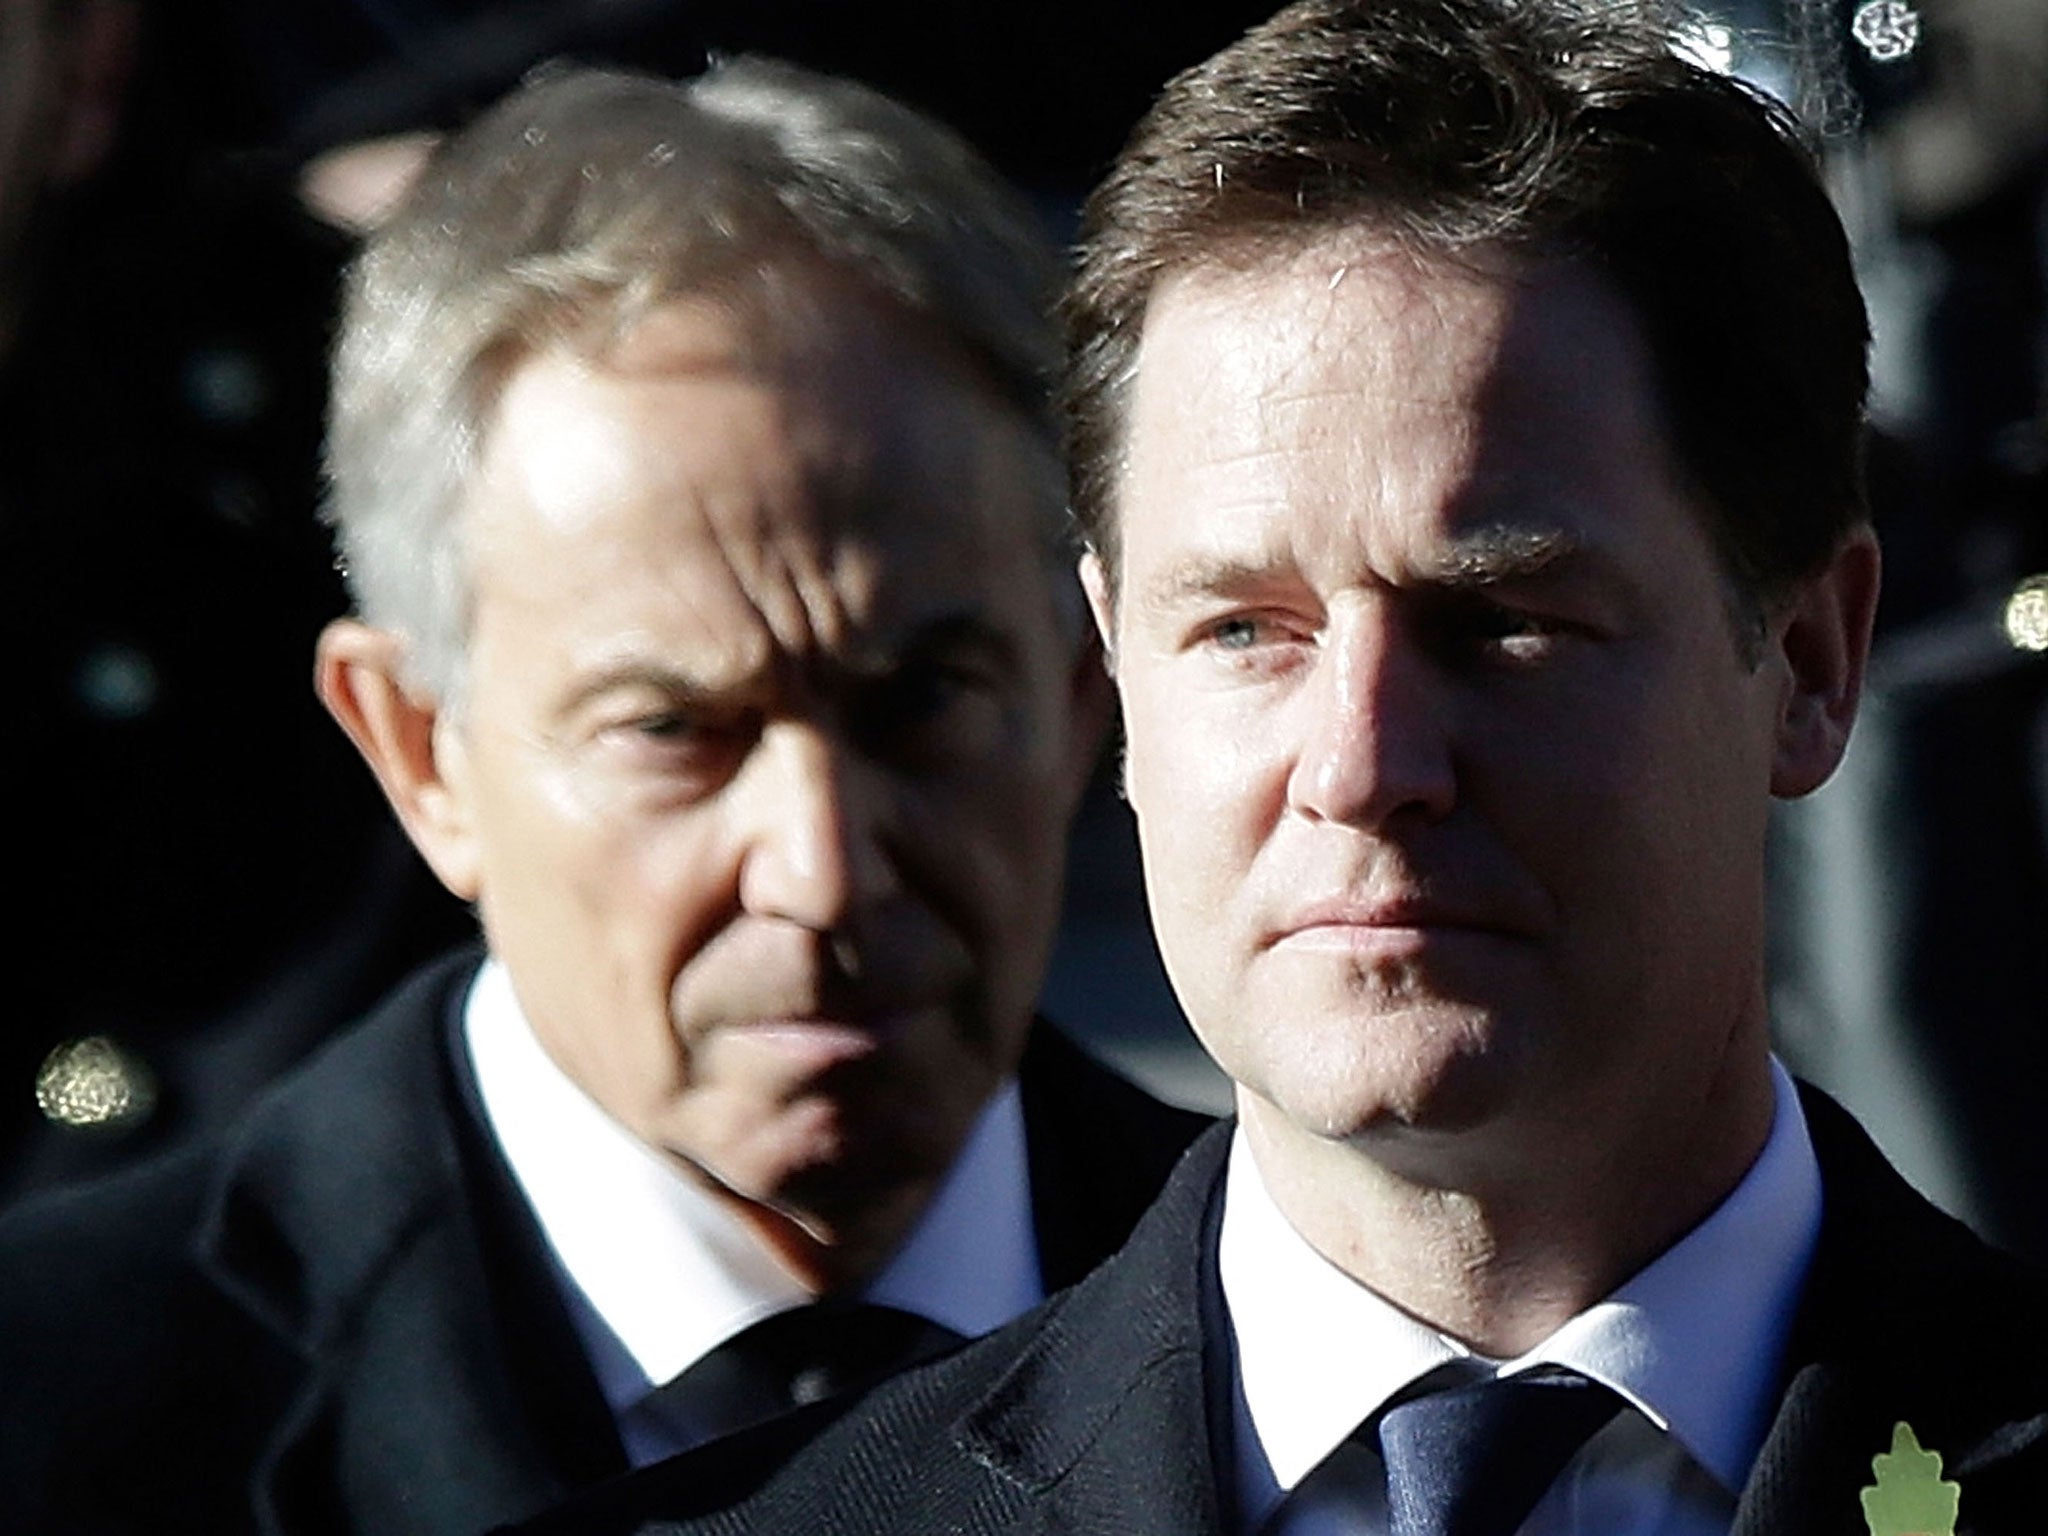 Tony Blair also took a swipe at the Coalition’s “inaction” over the three-year-long civil war in Syria